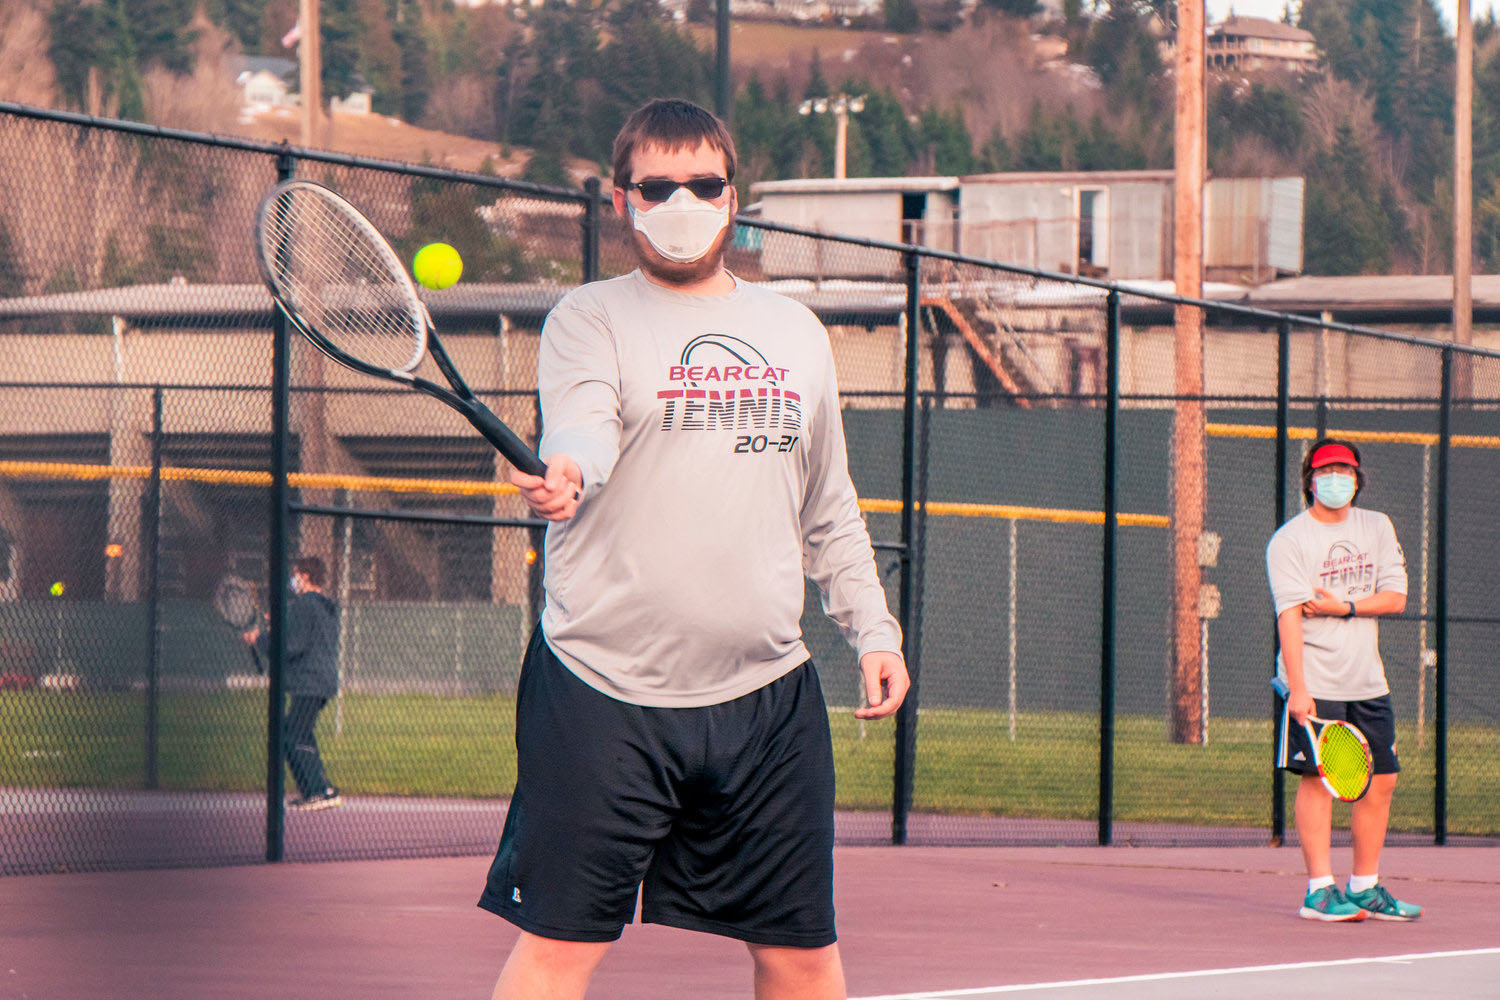 FILE PHOTO - W.F. West's Cade Cameron, along with teammate Christian Iverson, won the sub-districts doubles championship at Black Hills High School Wednesday.